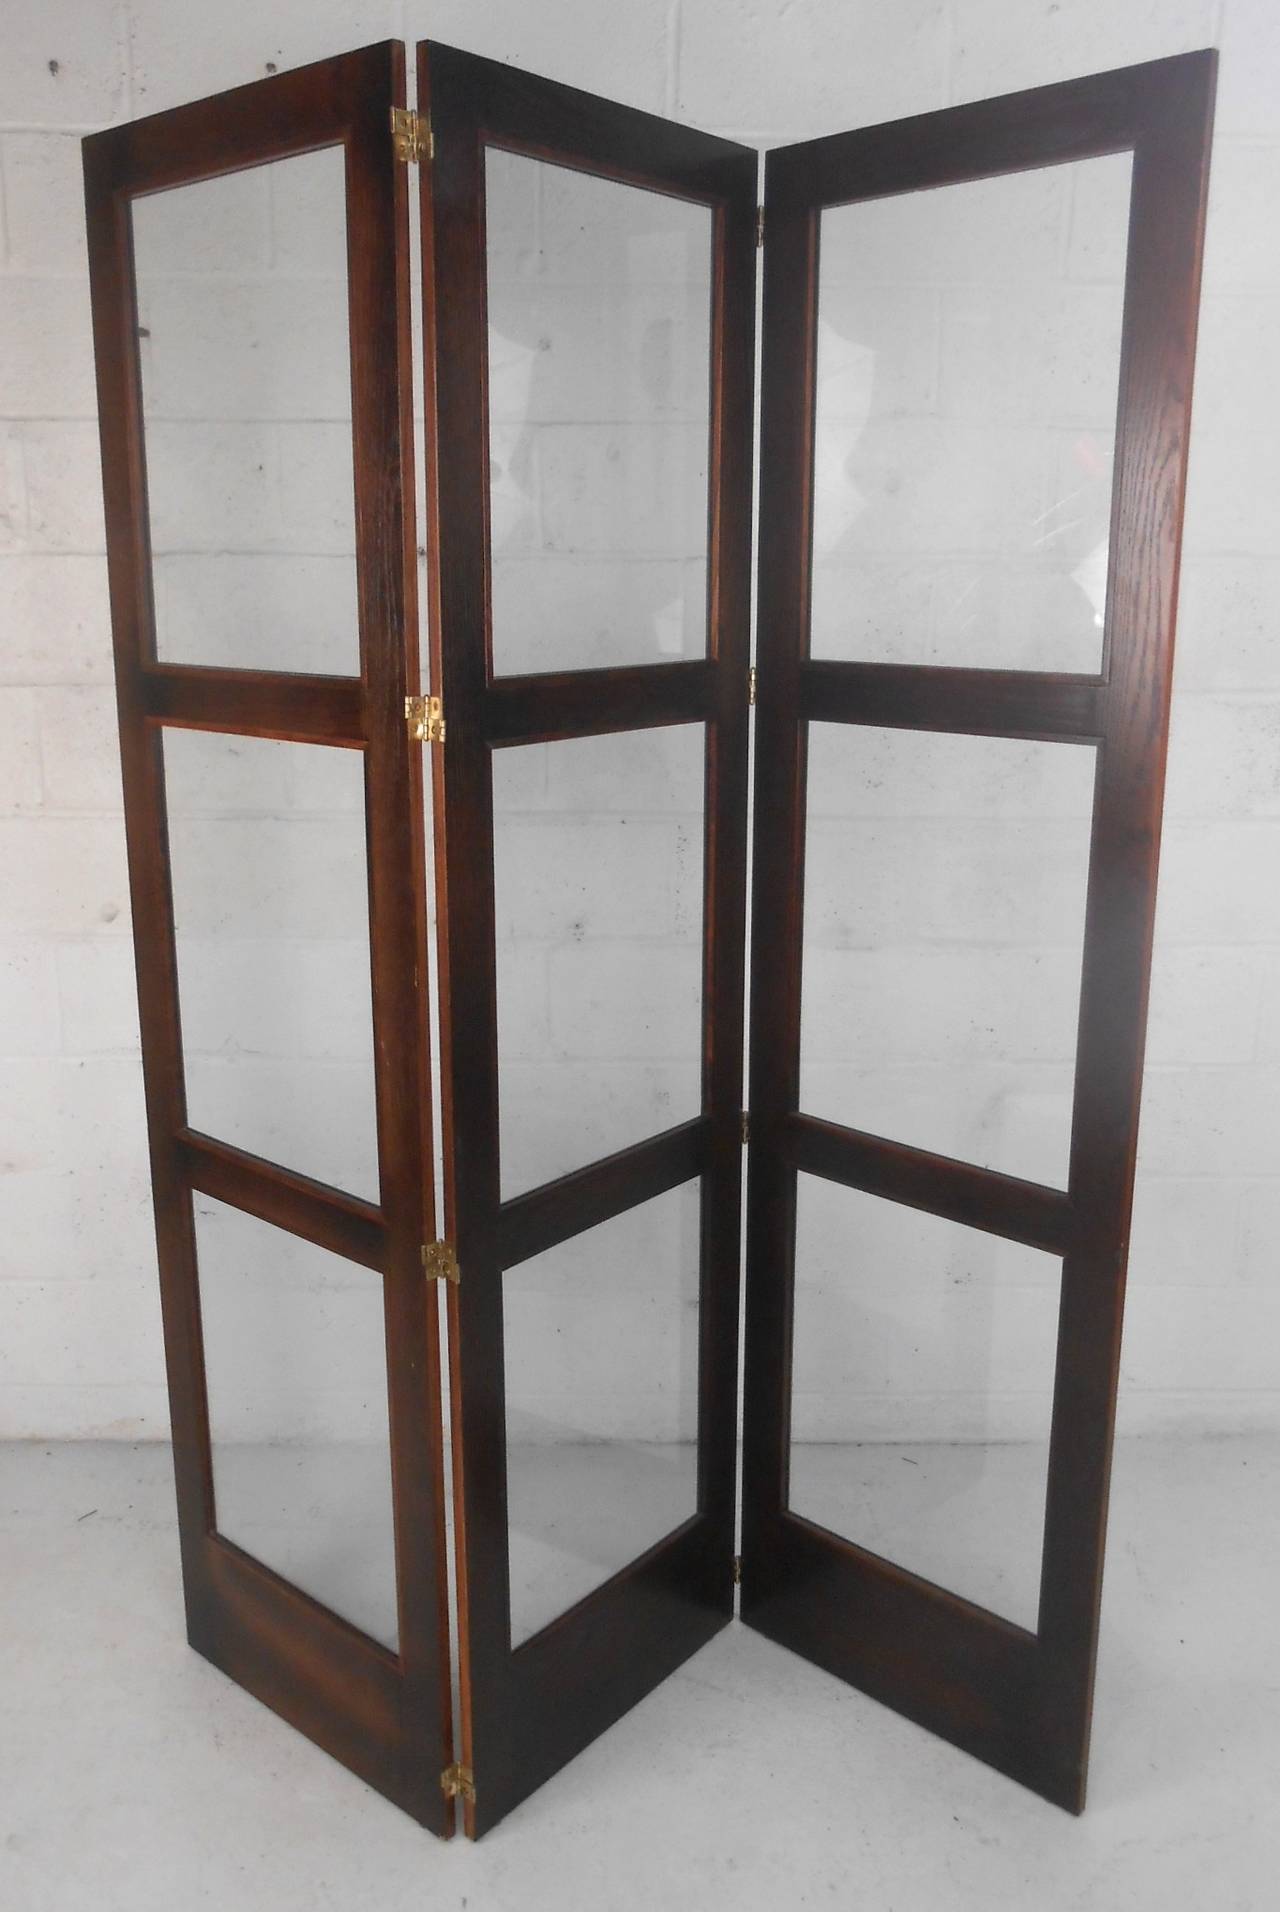 This mid-century hardwood folding screen features vintage glass set in trifold double hinged frame. Unique solution for decor or dividing up living space. Please confirm item location (NY or NJ).